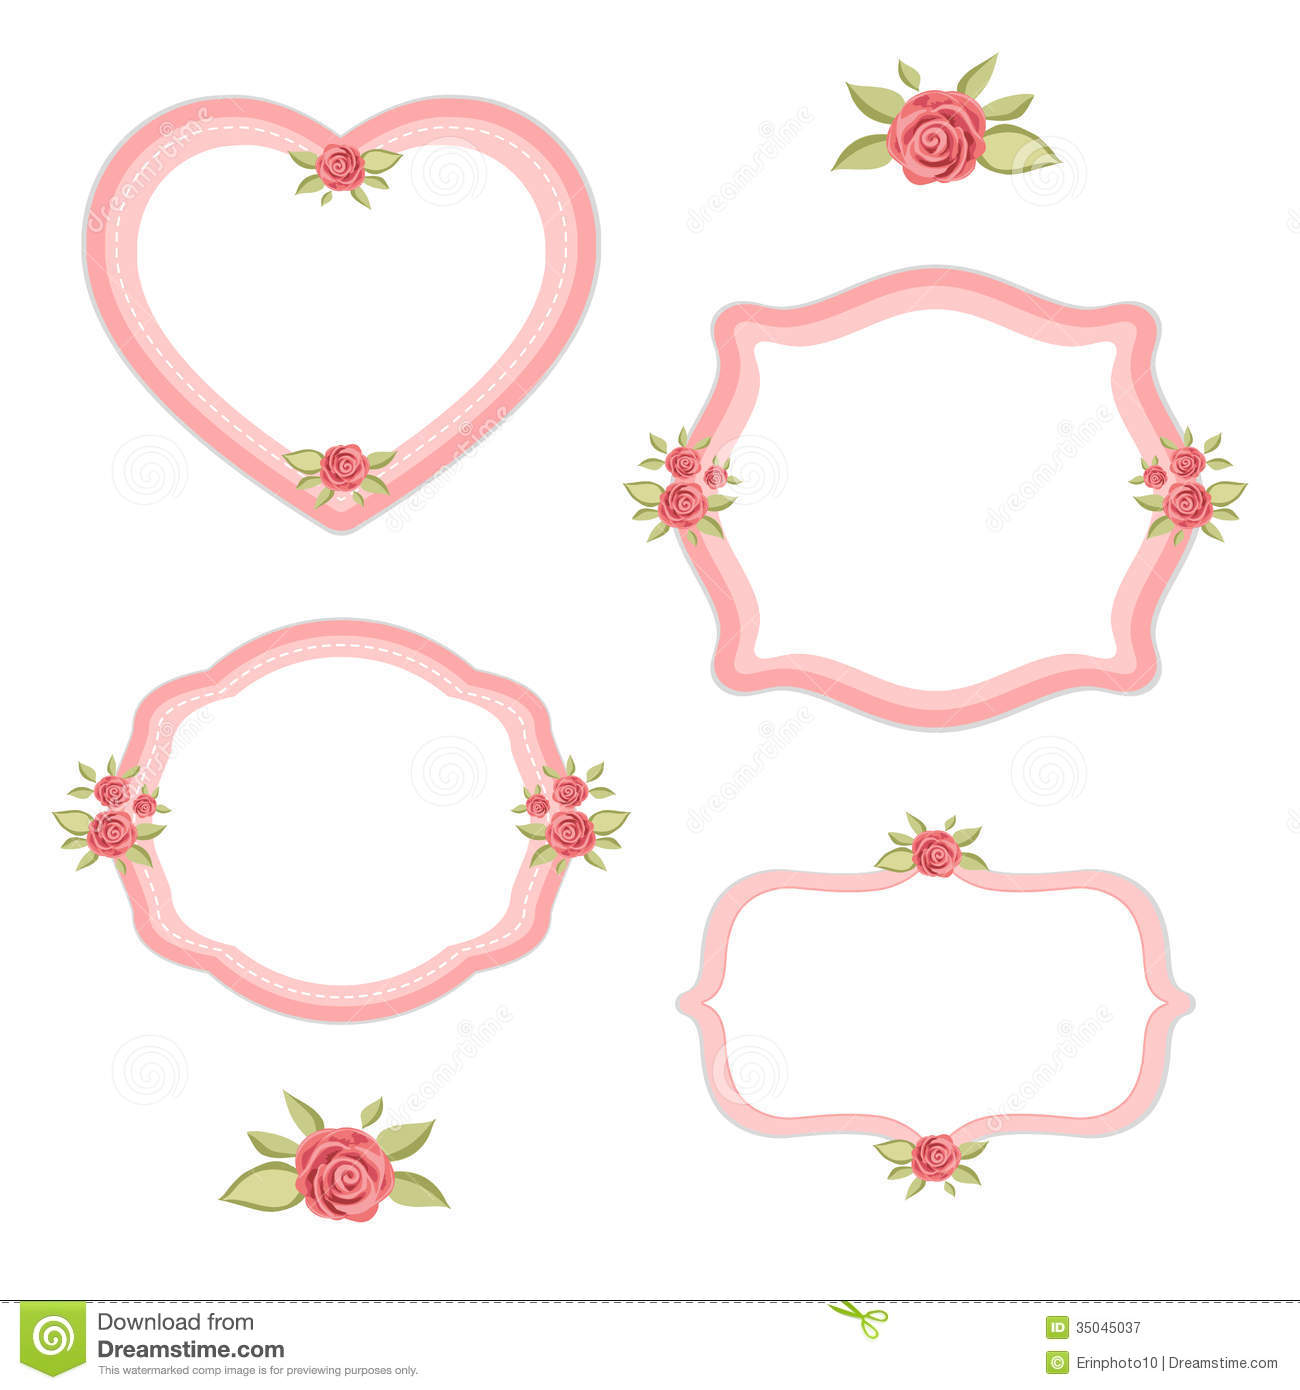 Floral Heart Frames With Roses In Shabby Chic Style Isolated On White